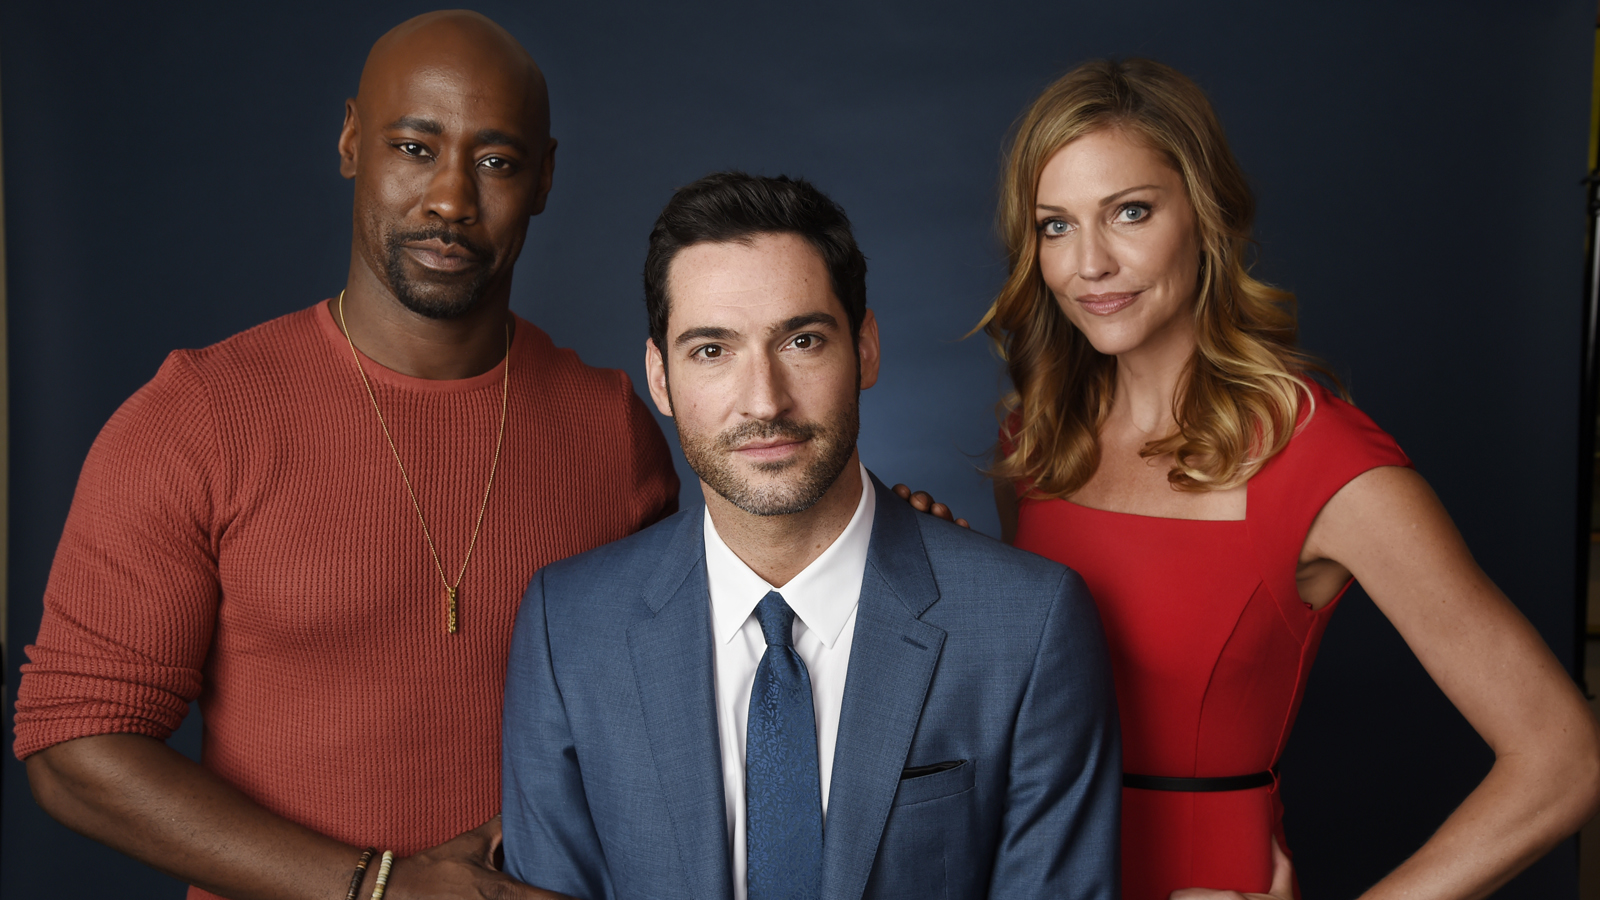 Lucifer Season 4 Filming Completed: Release Date Anticipations